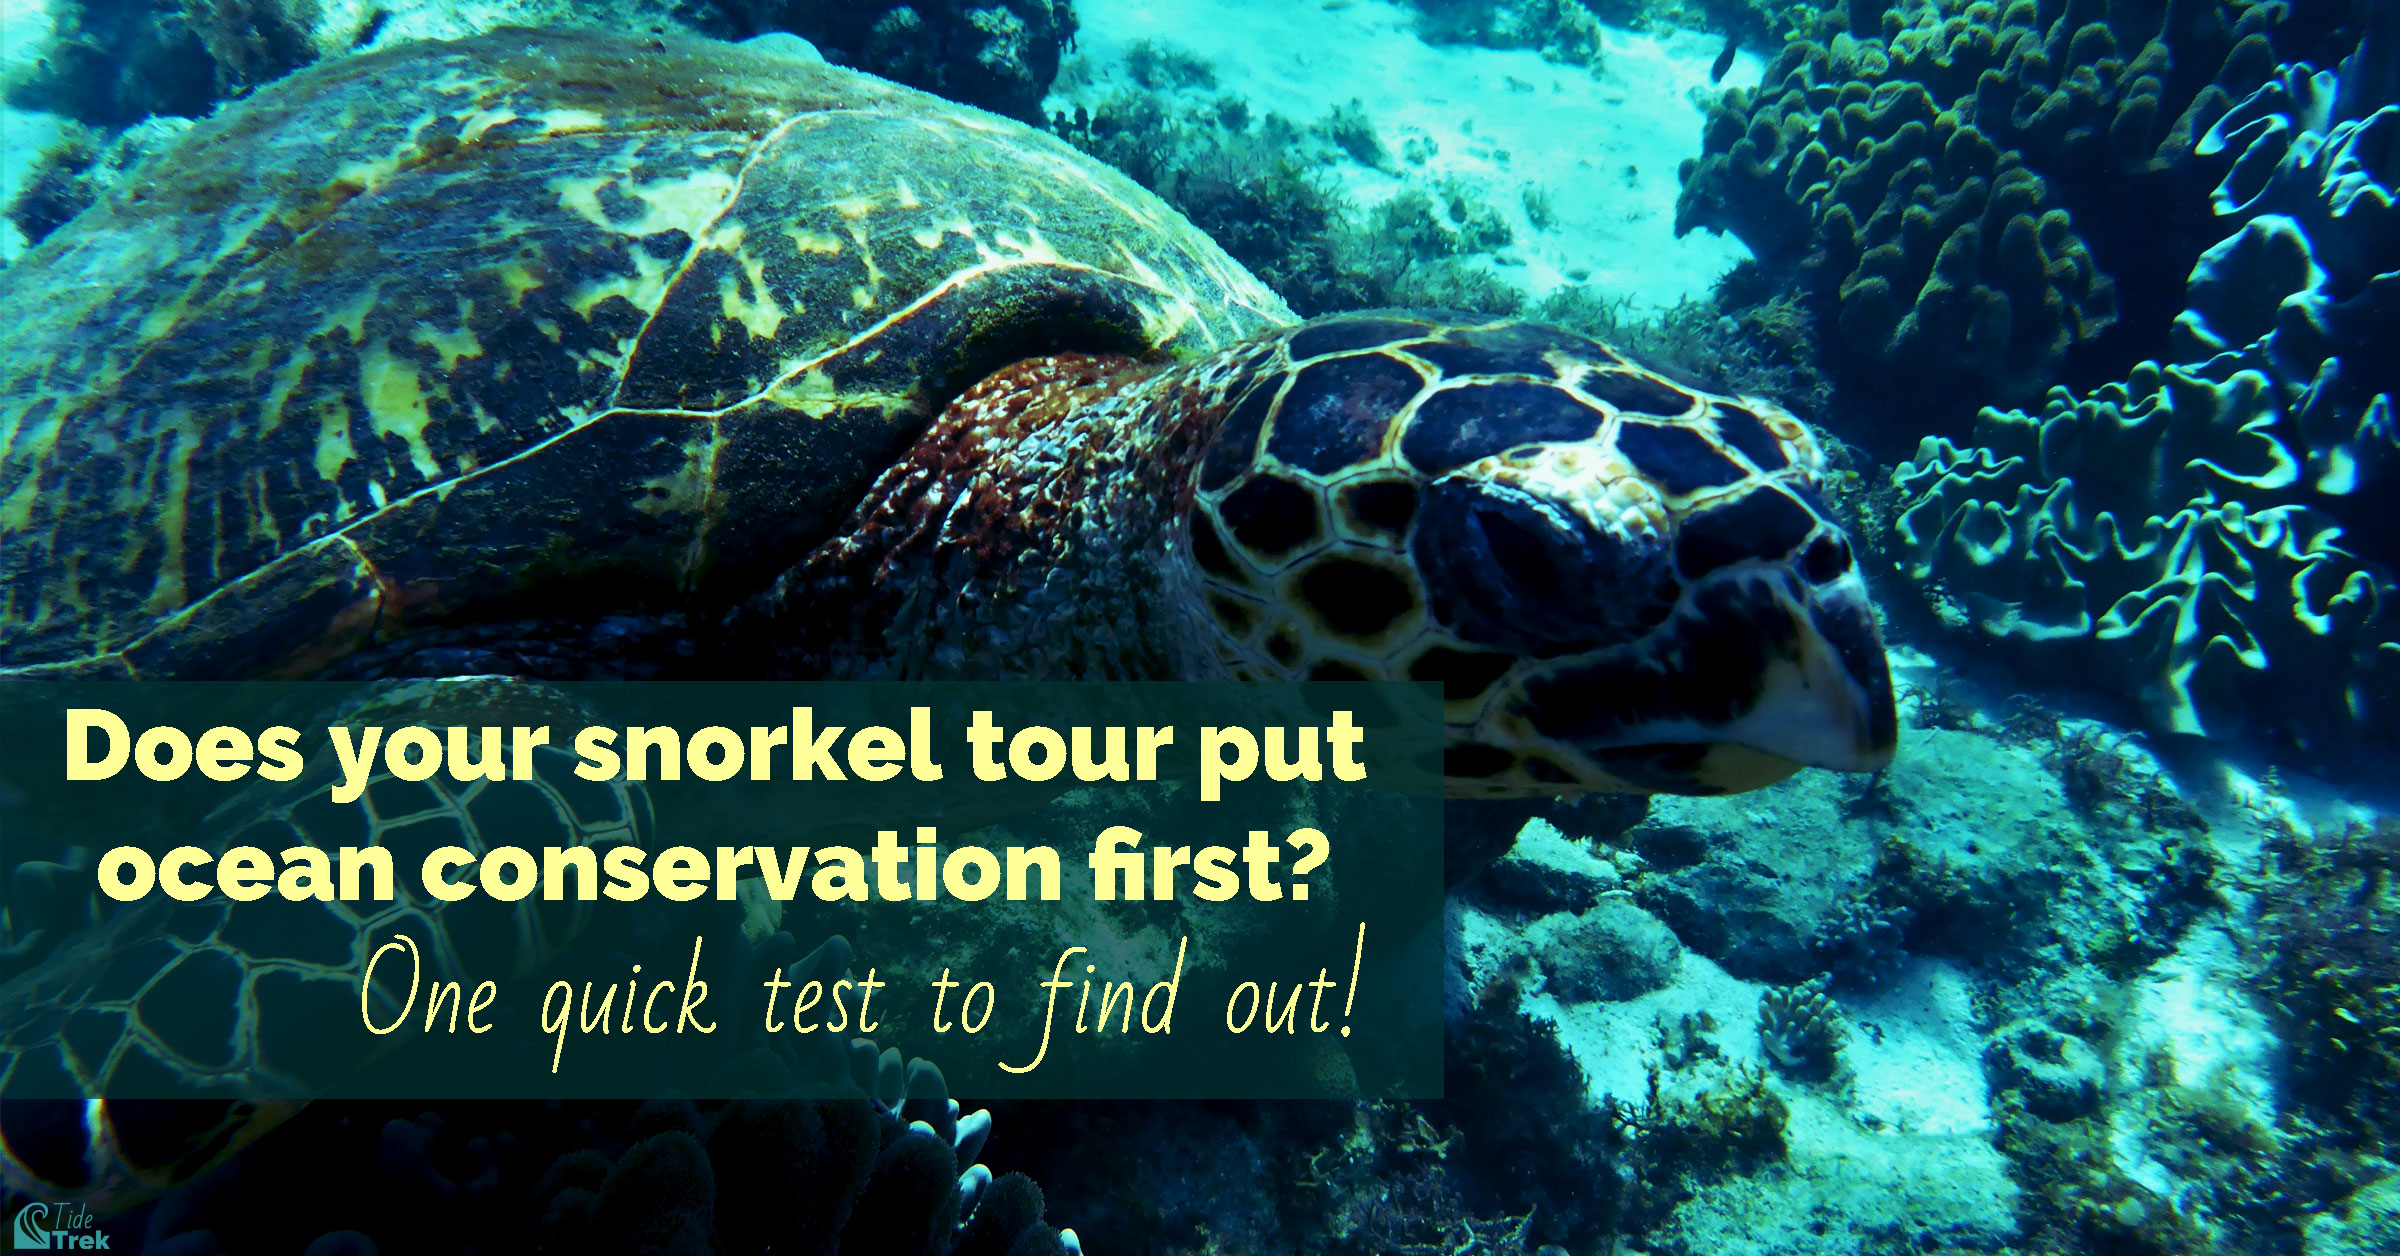 Close up underwater photo of a sea turtle with text overlay: Does your snorkel tour put ocean conservation first?